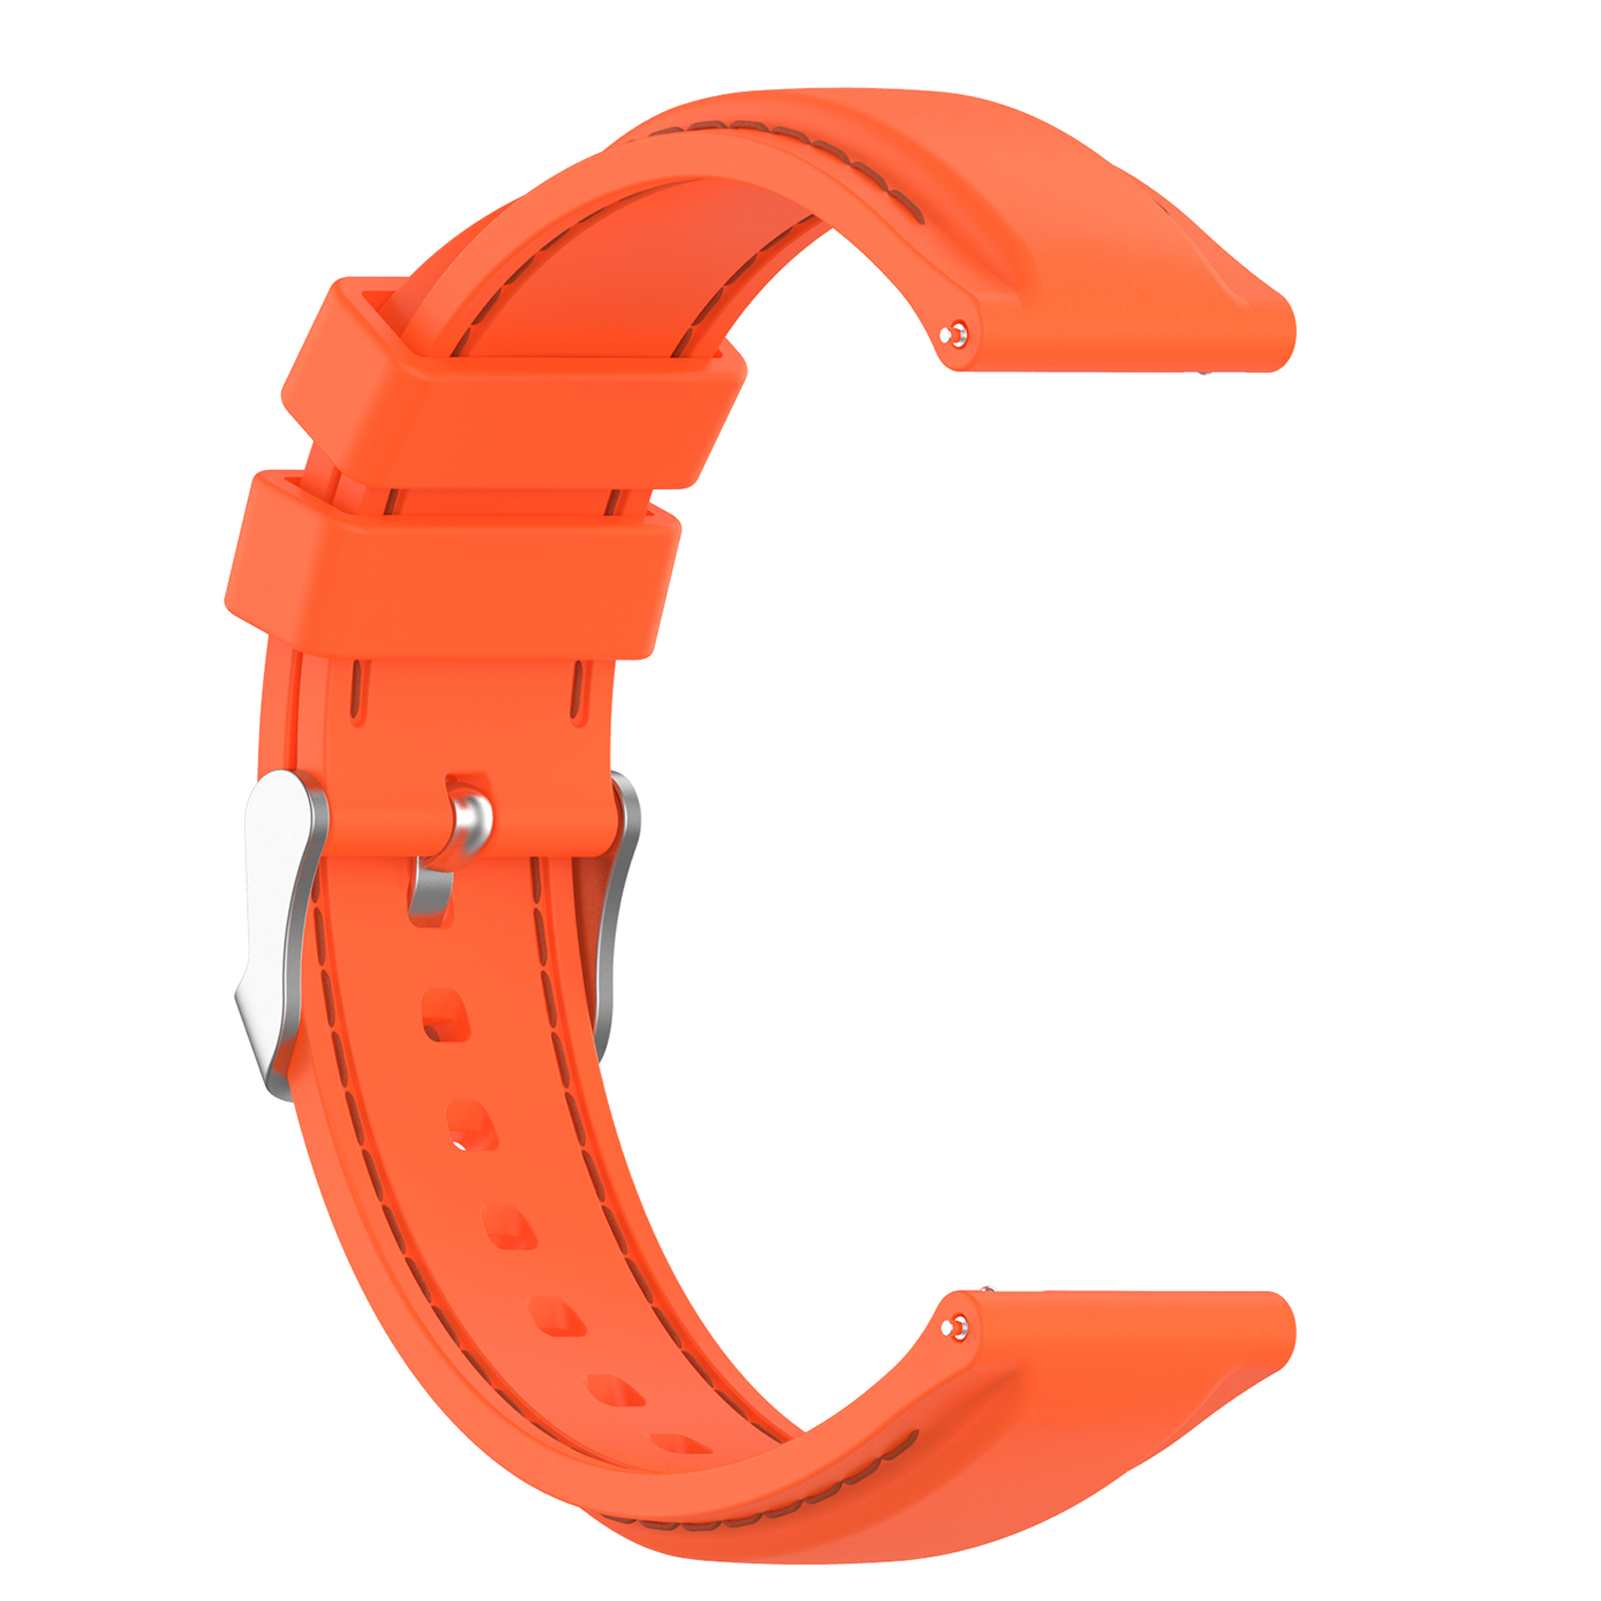 22mm-Soft-Silicone-Watch-Strap-Band-Replacement-Sport-Bracelet-Watchband-For-Ticwatch-Pro3LTE-Haylou-1809083-9